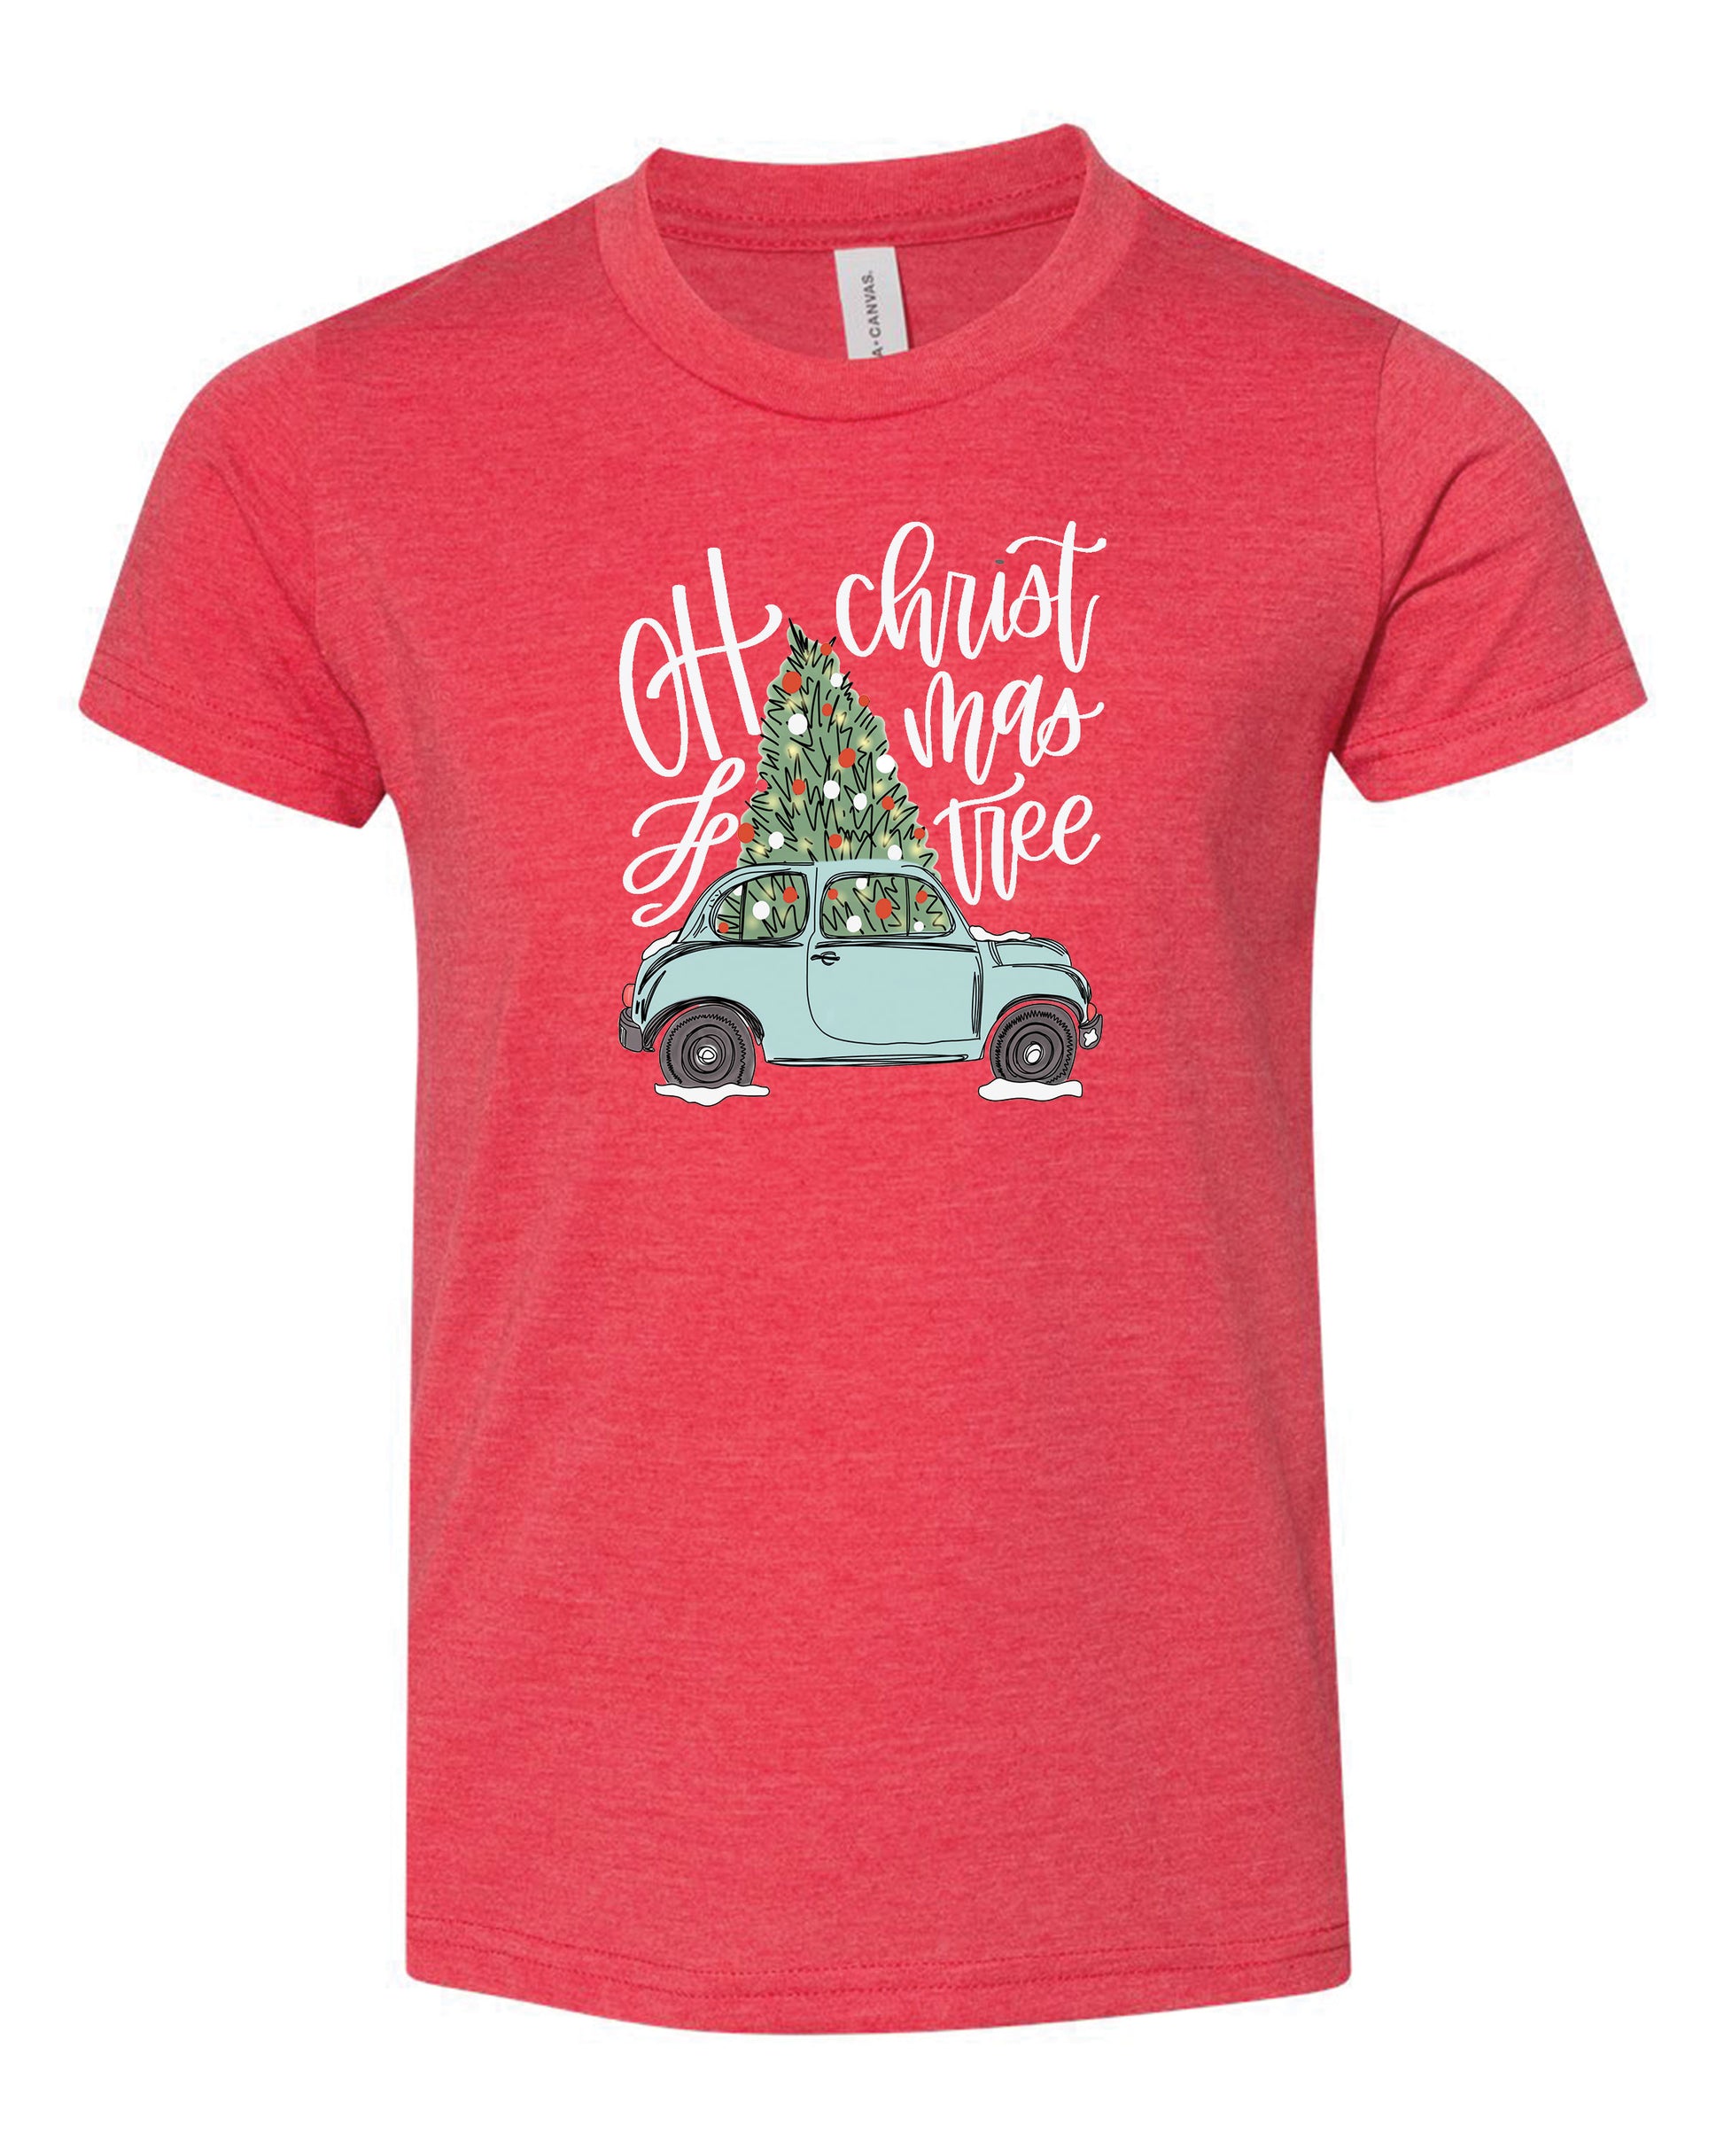 Oh Christmas Tree | Kids Tee-Kids Tees-Sister Shirts-Sister Shirts, Cute & Custom Tees for Mama & Littles in Trussville, Alabama.